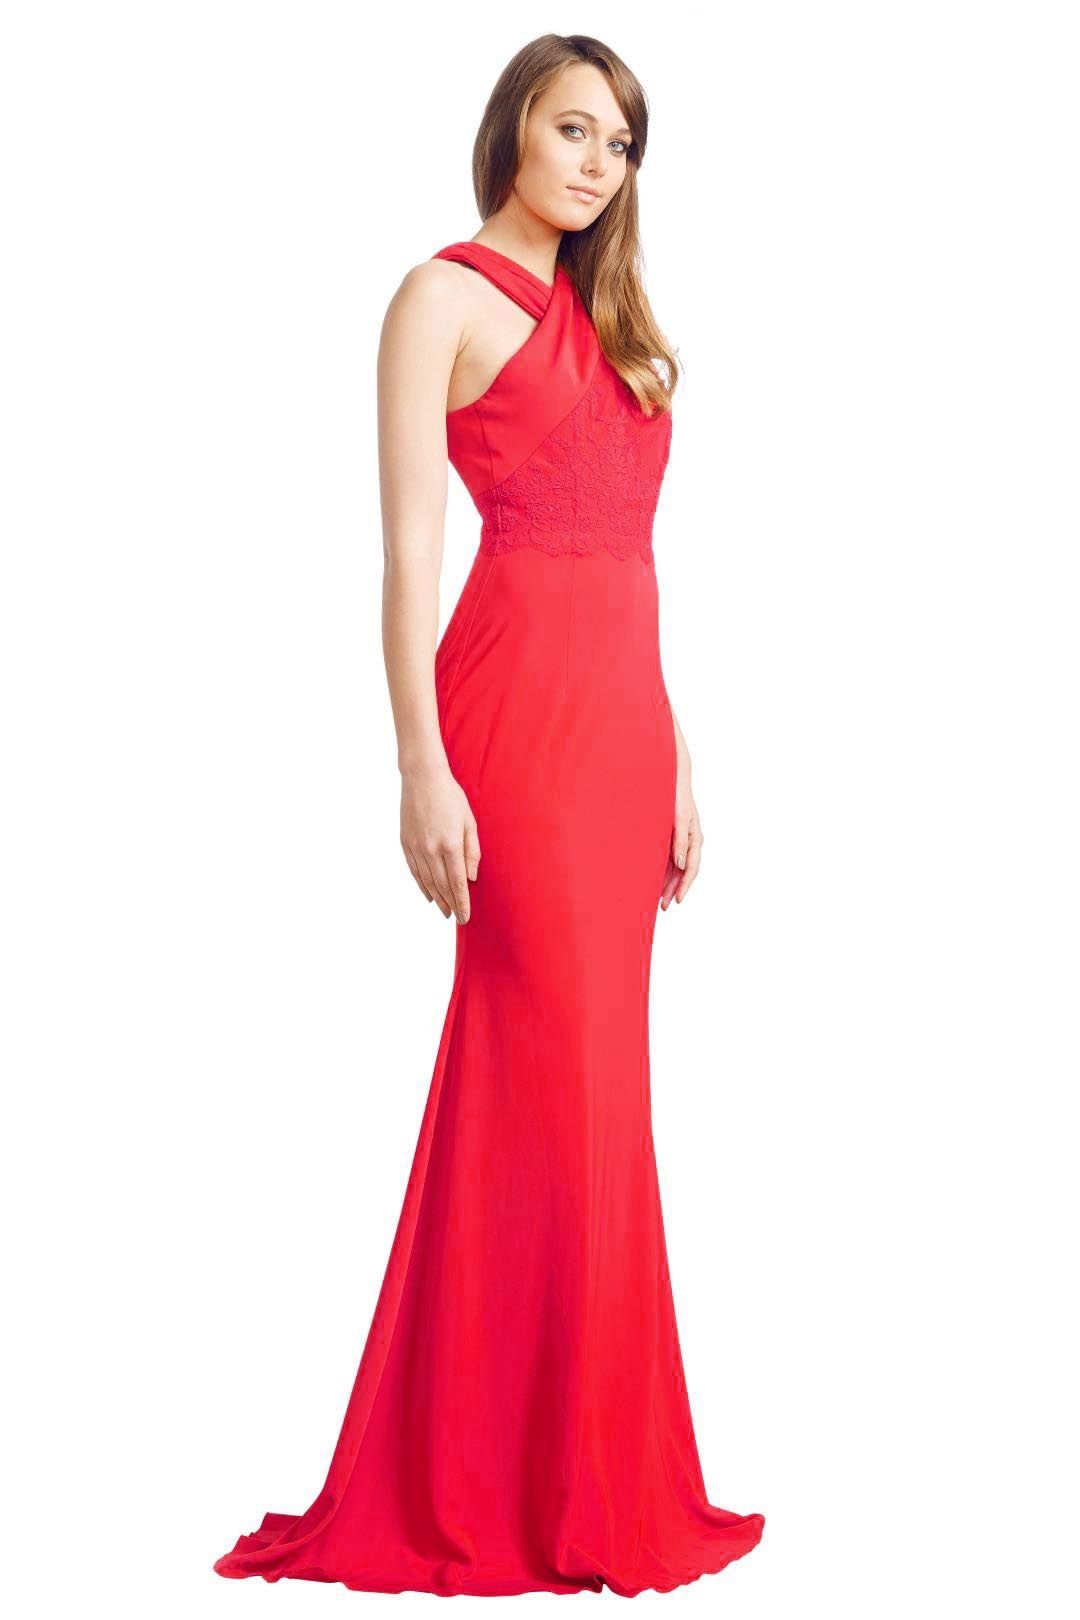 Alex Perry - Aimee Gown - Red - Side